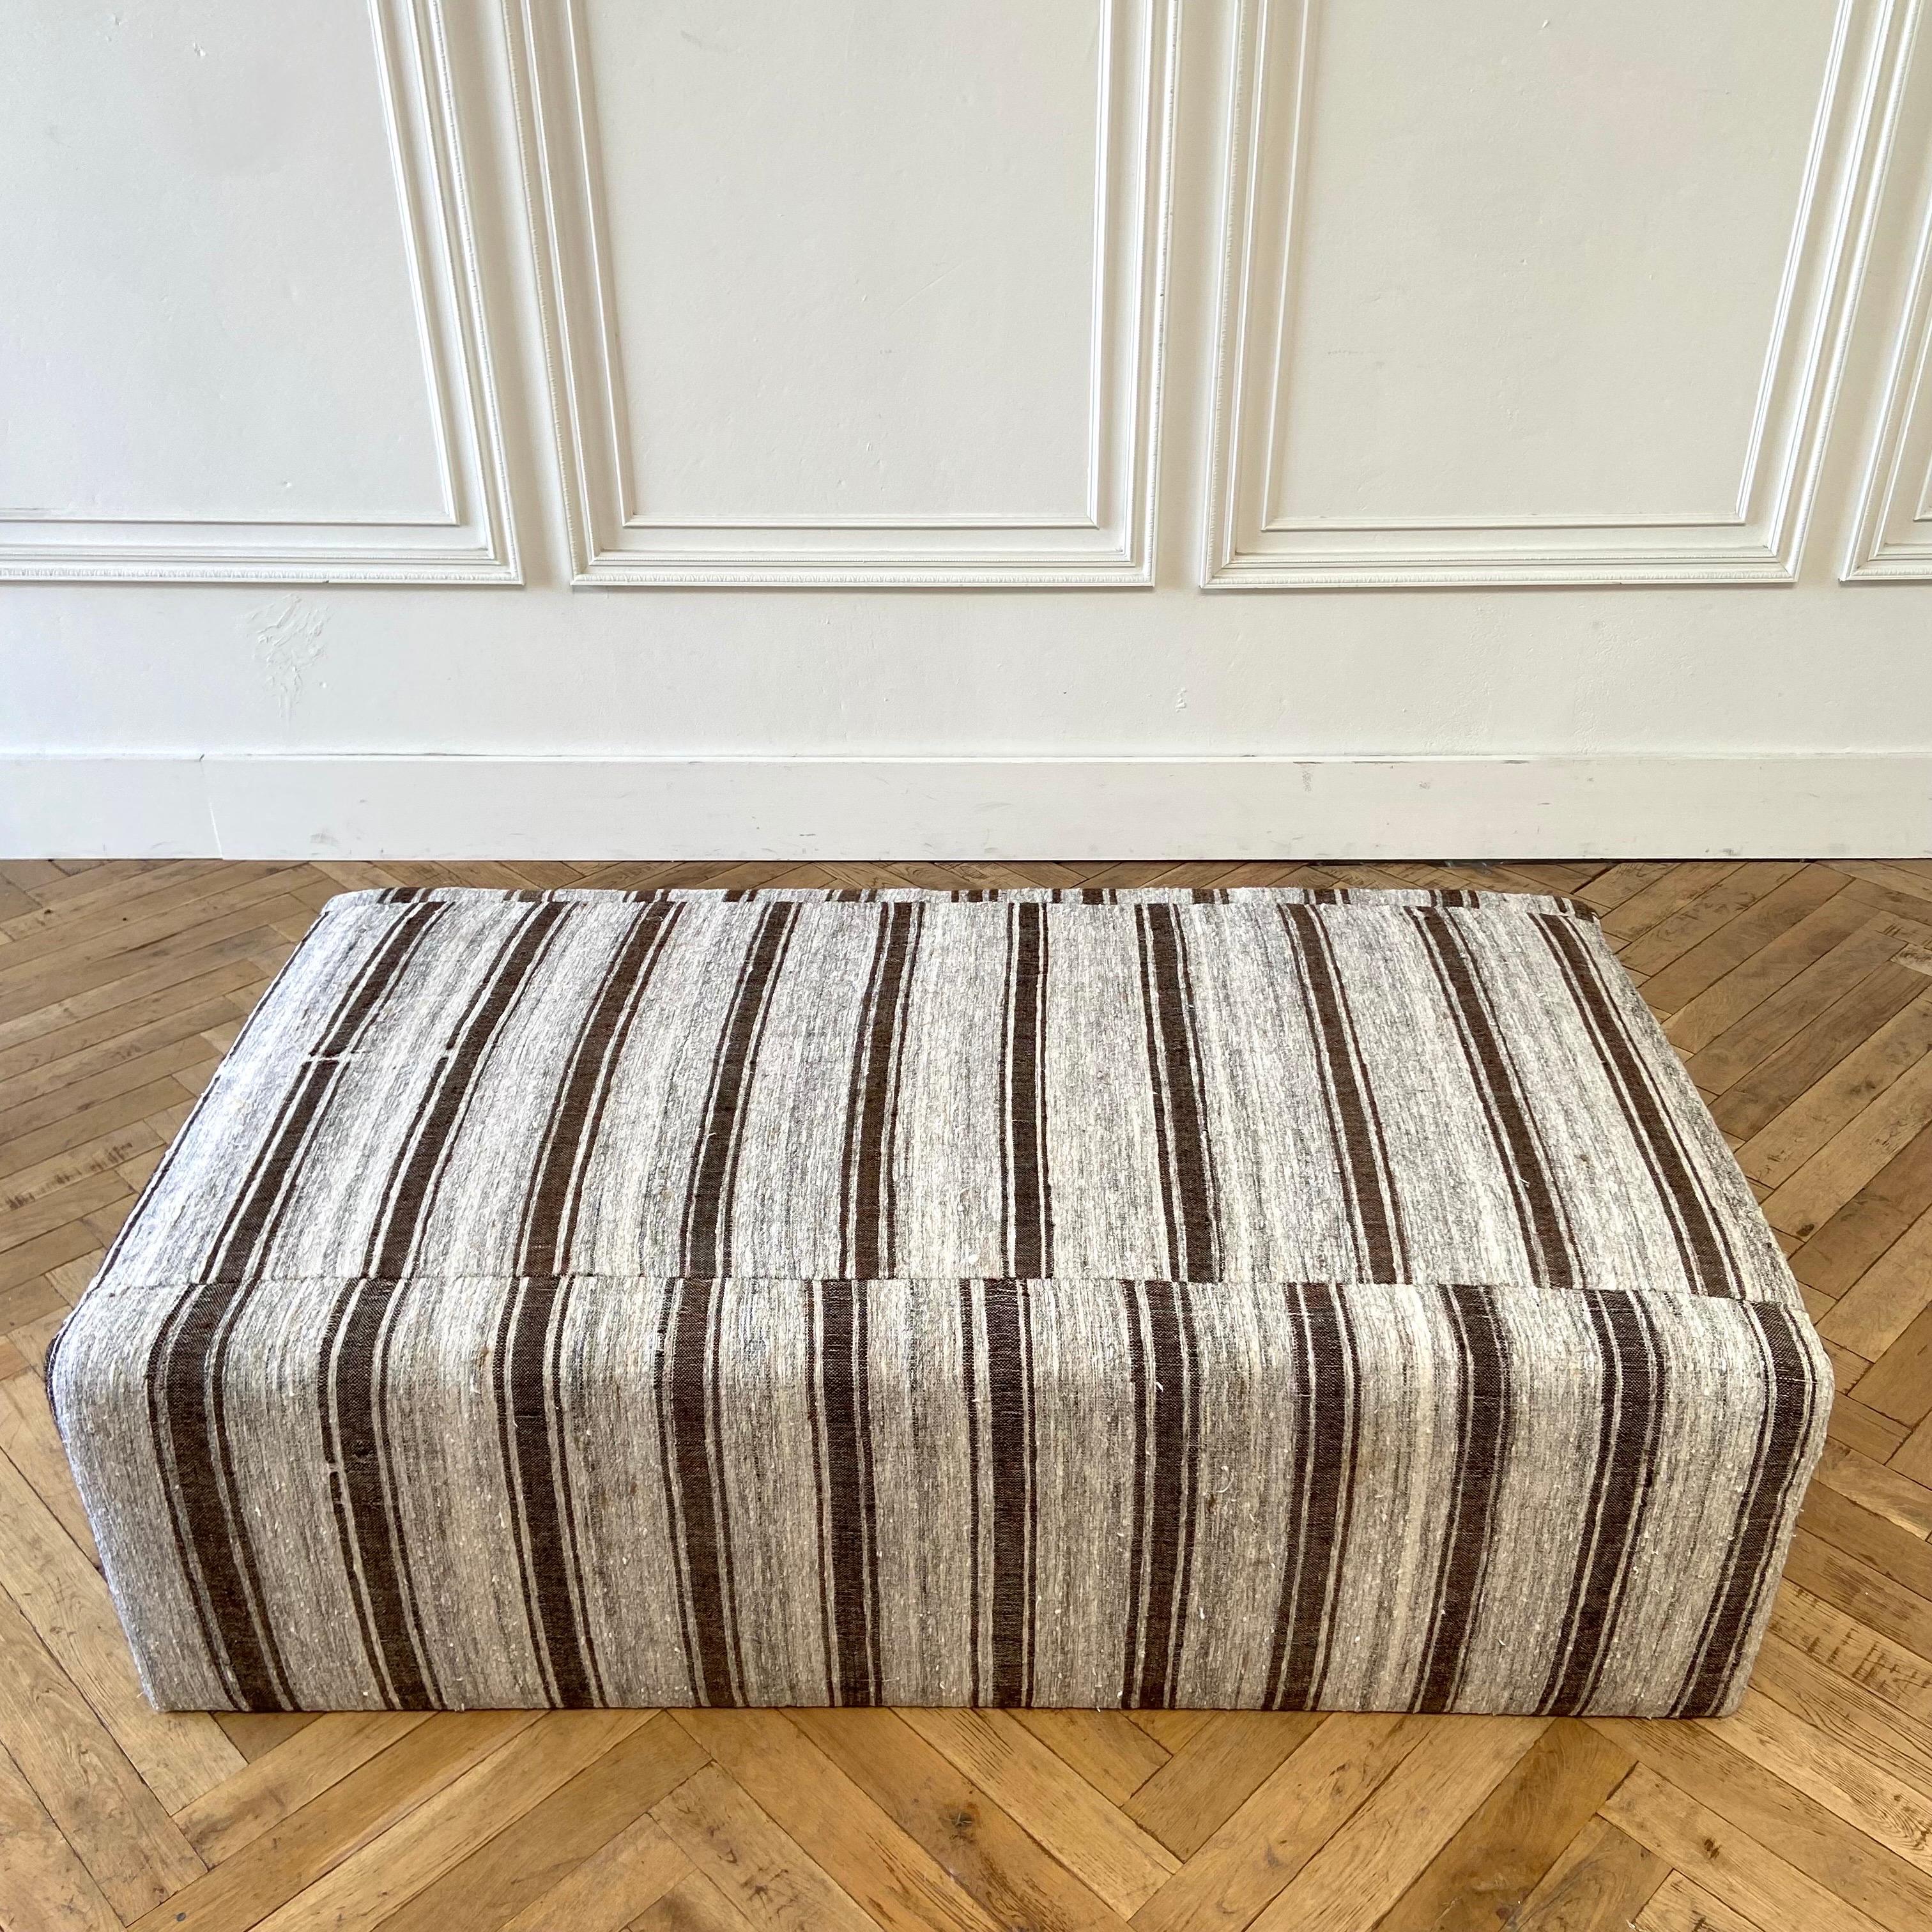 Vintage Turkish rug Cube style Cocktail ottoman 
Size:60” W x 32” D x 18” H
Upholstered from a vintage rug in an oyster off white/gray and brown.
All Rugs have been professionally cleaned prior to construction.
A solid wood construction, with